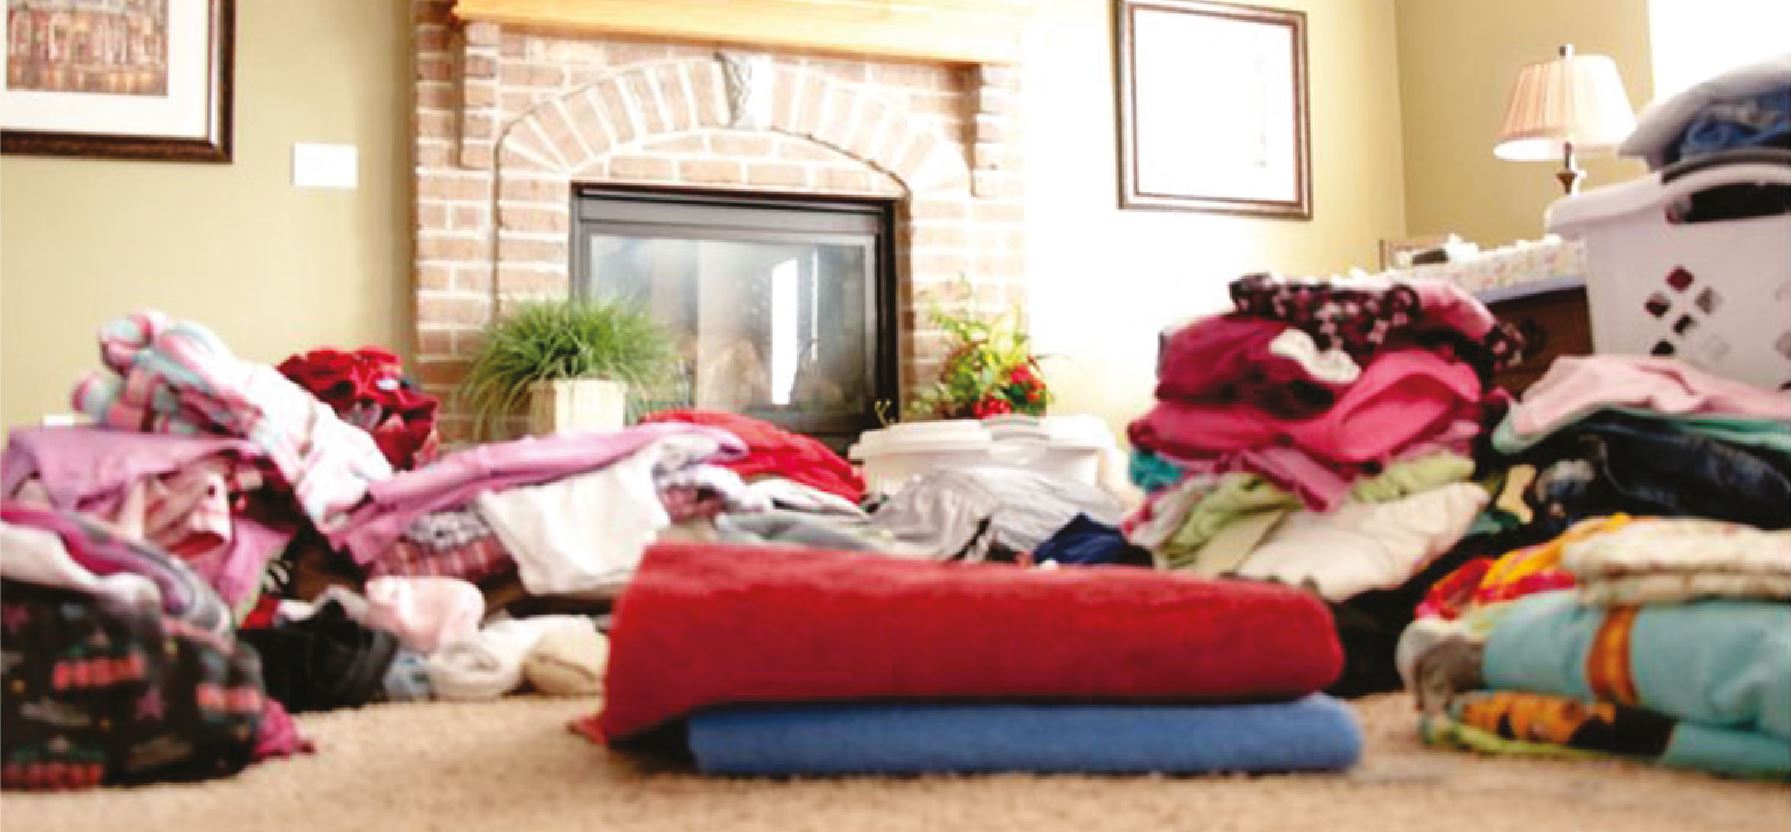 Three reasons to declutter your home this spring